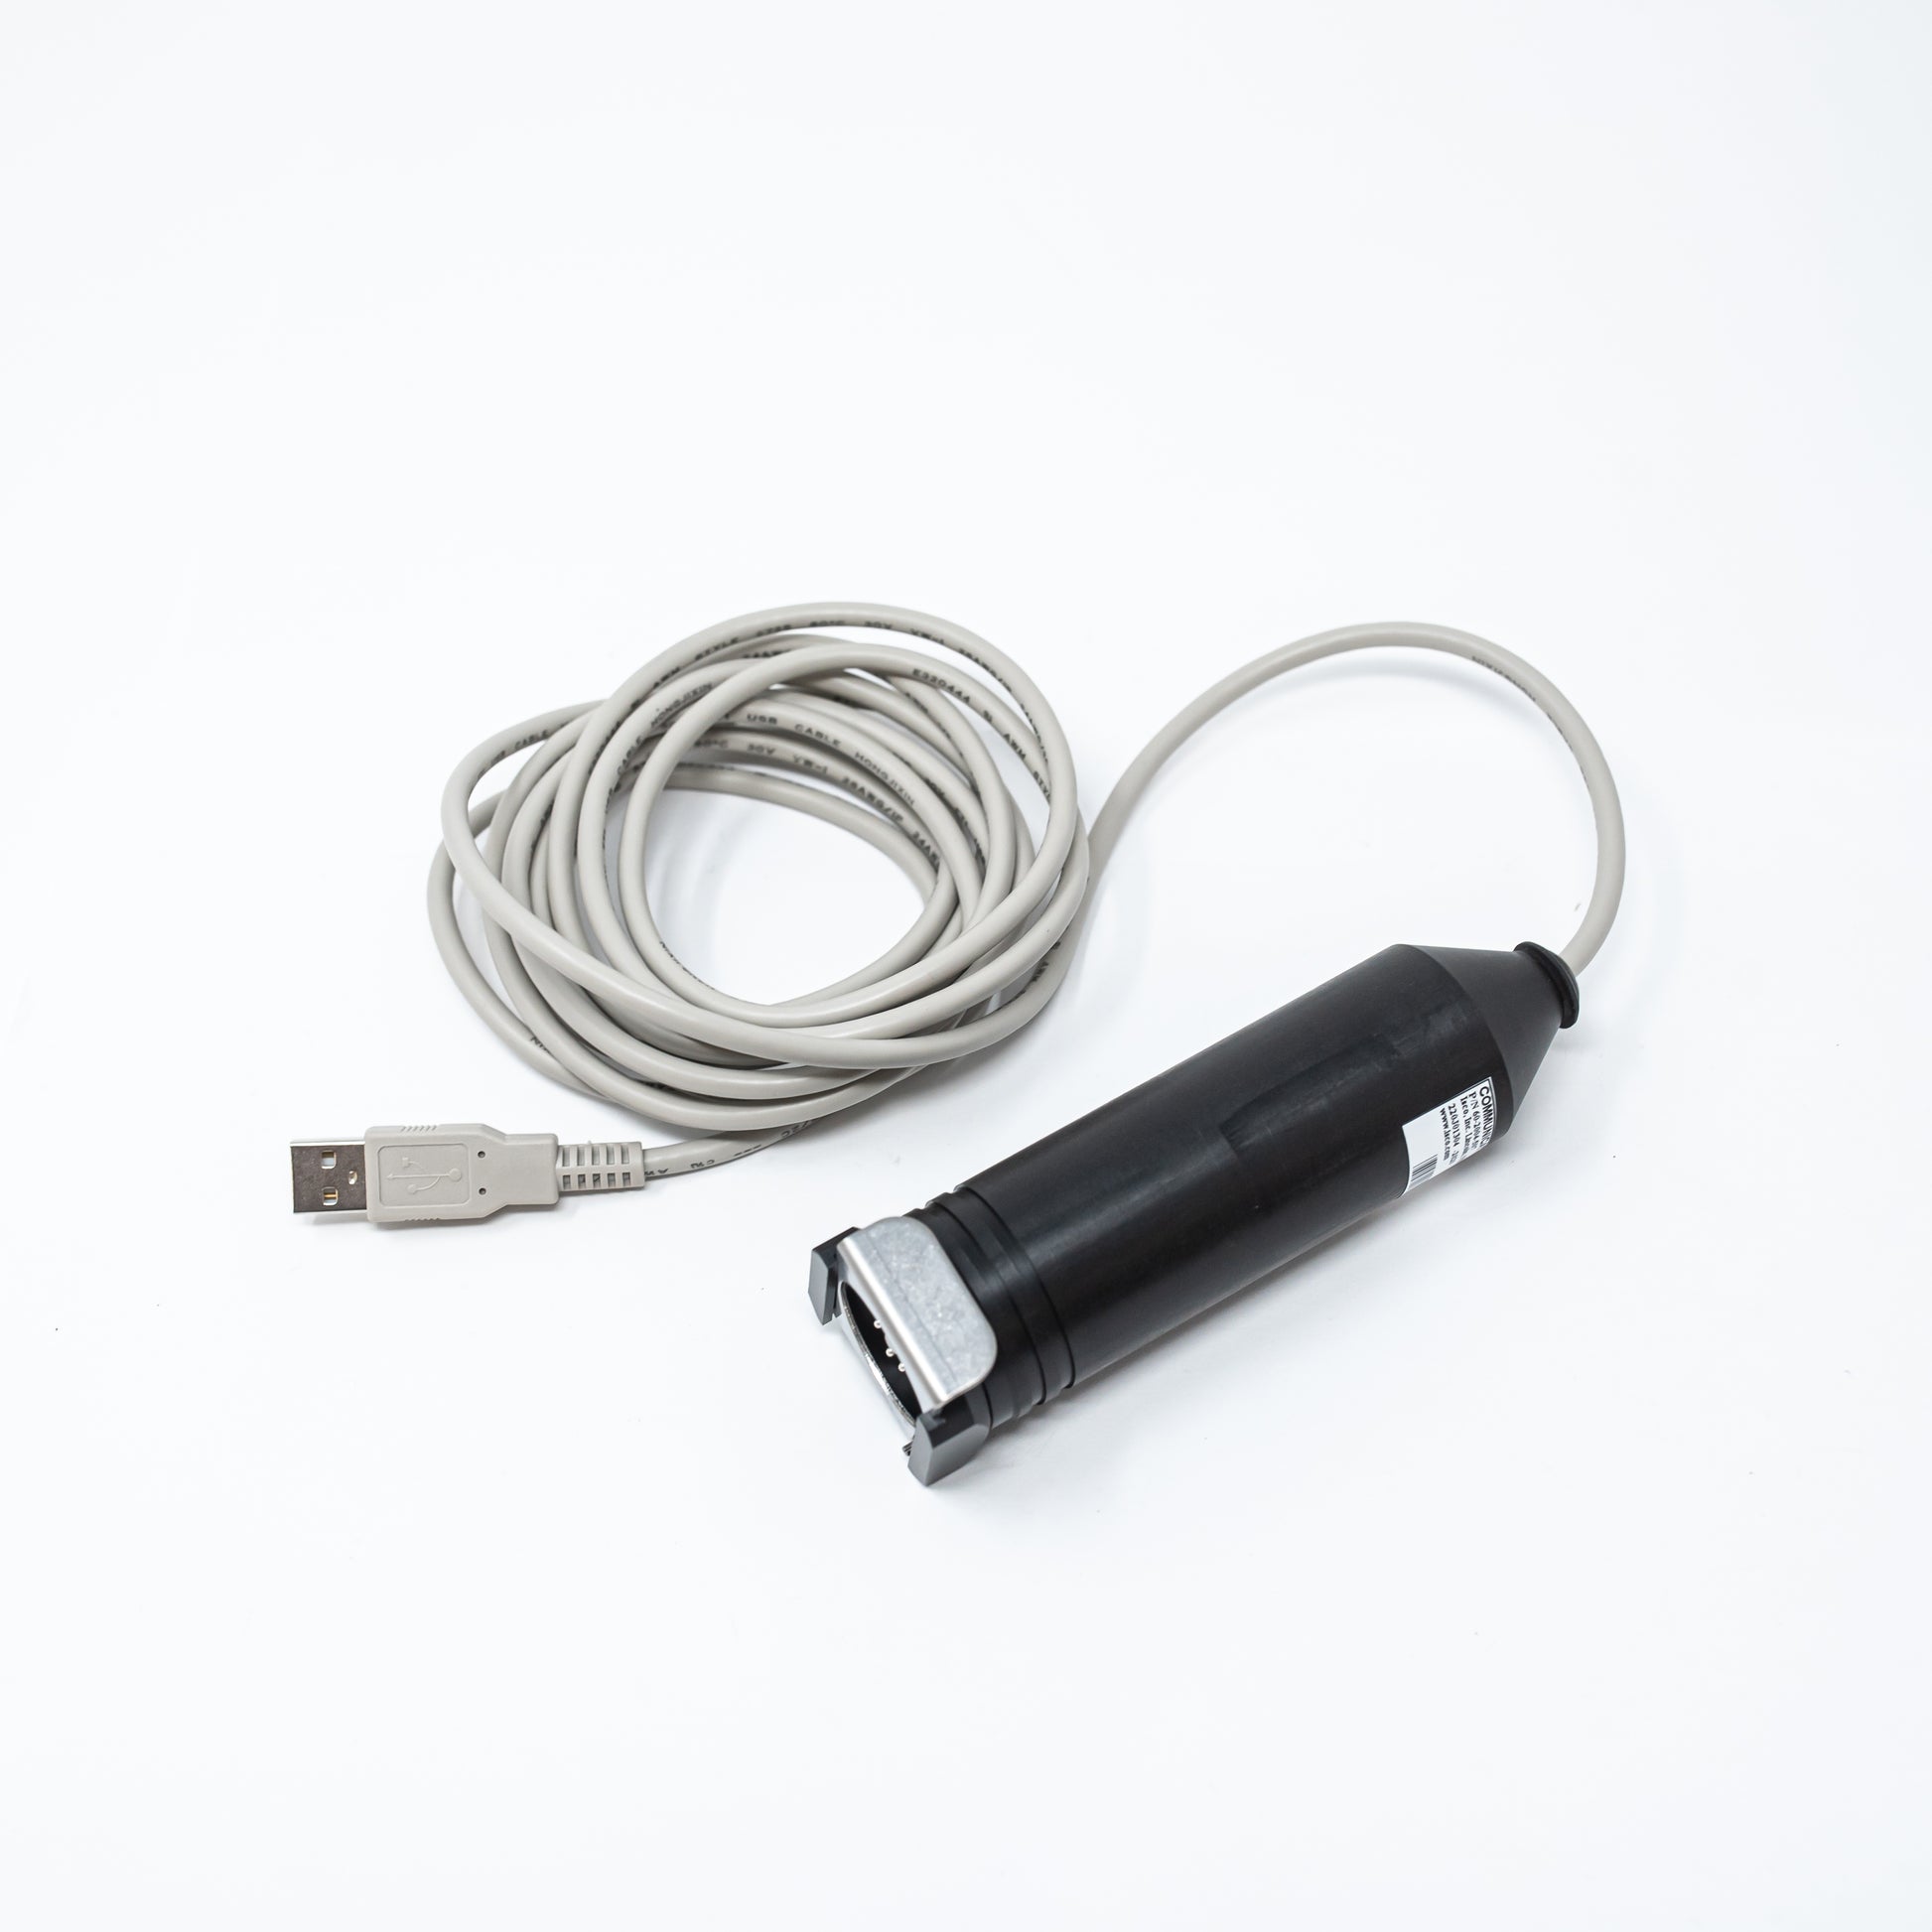 USB cable with connector